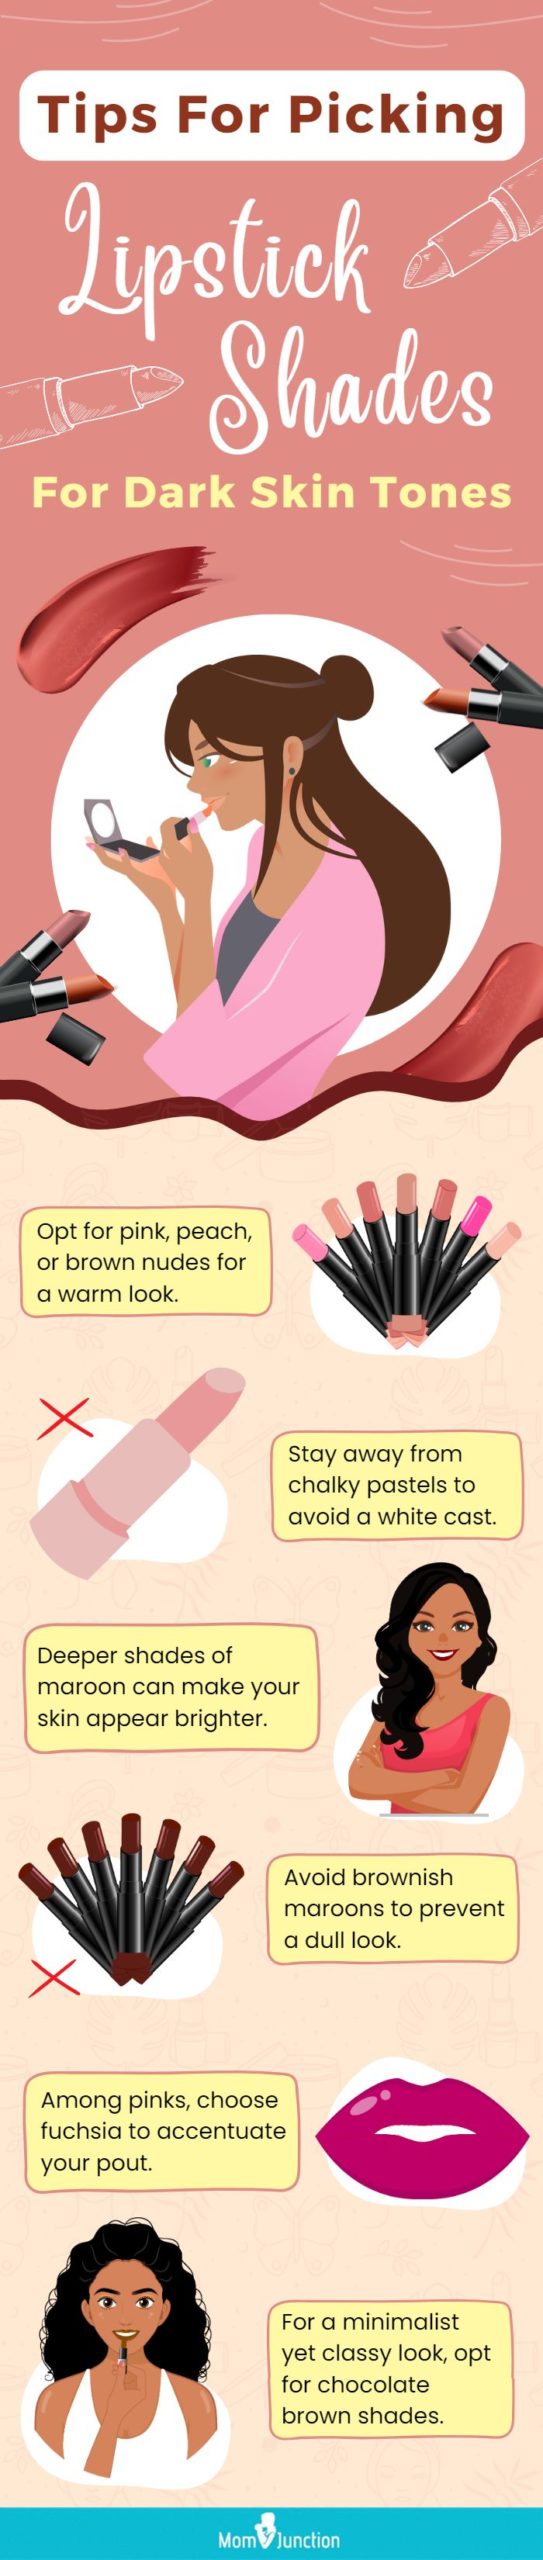 Tips For Picking Lipstick Shades For Dark Skin Tones (infographic)